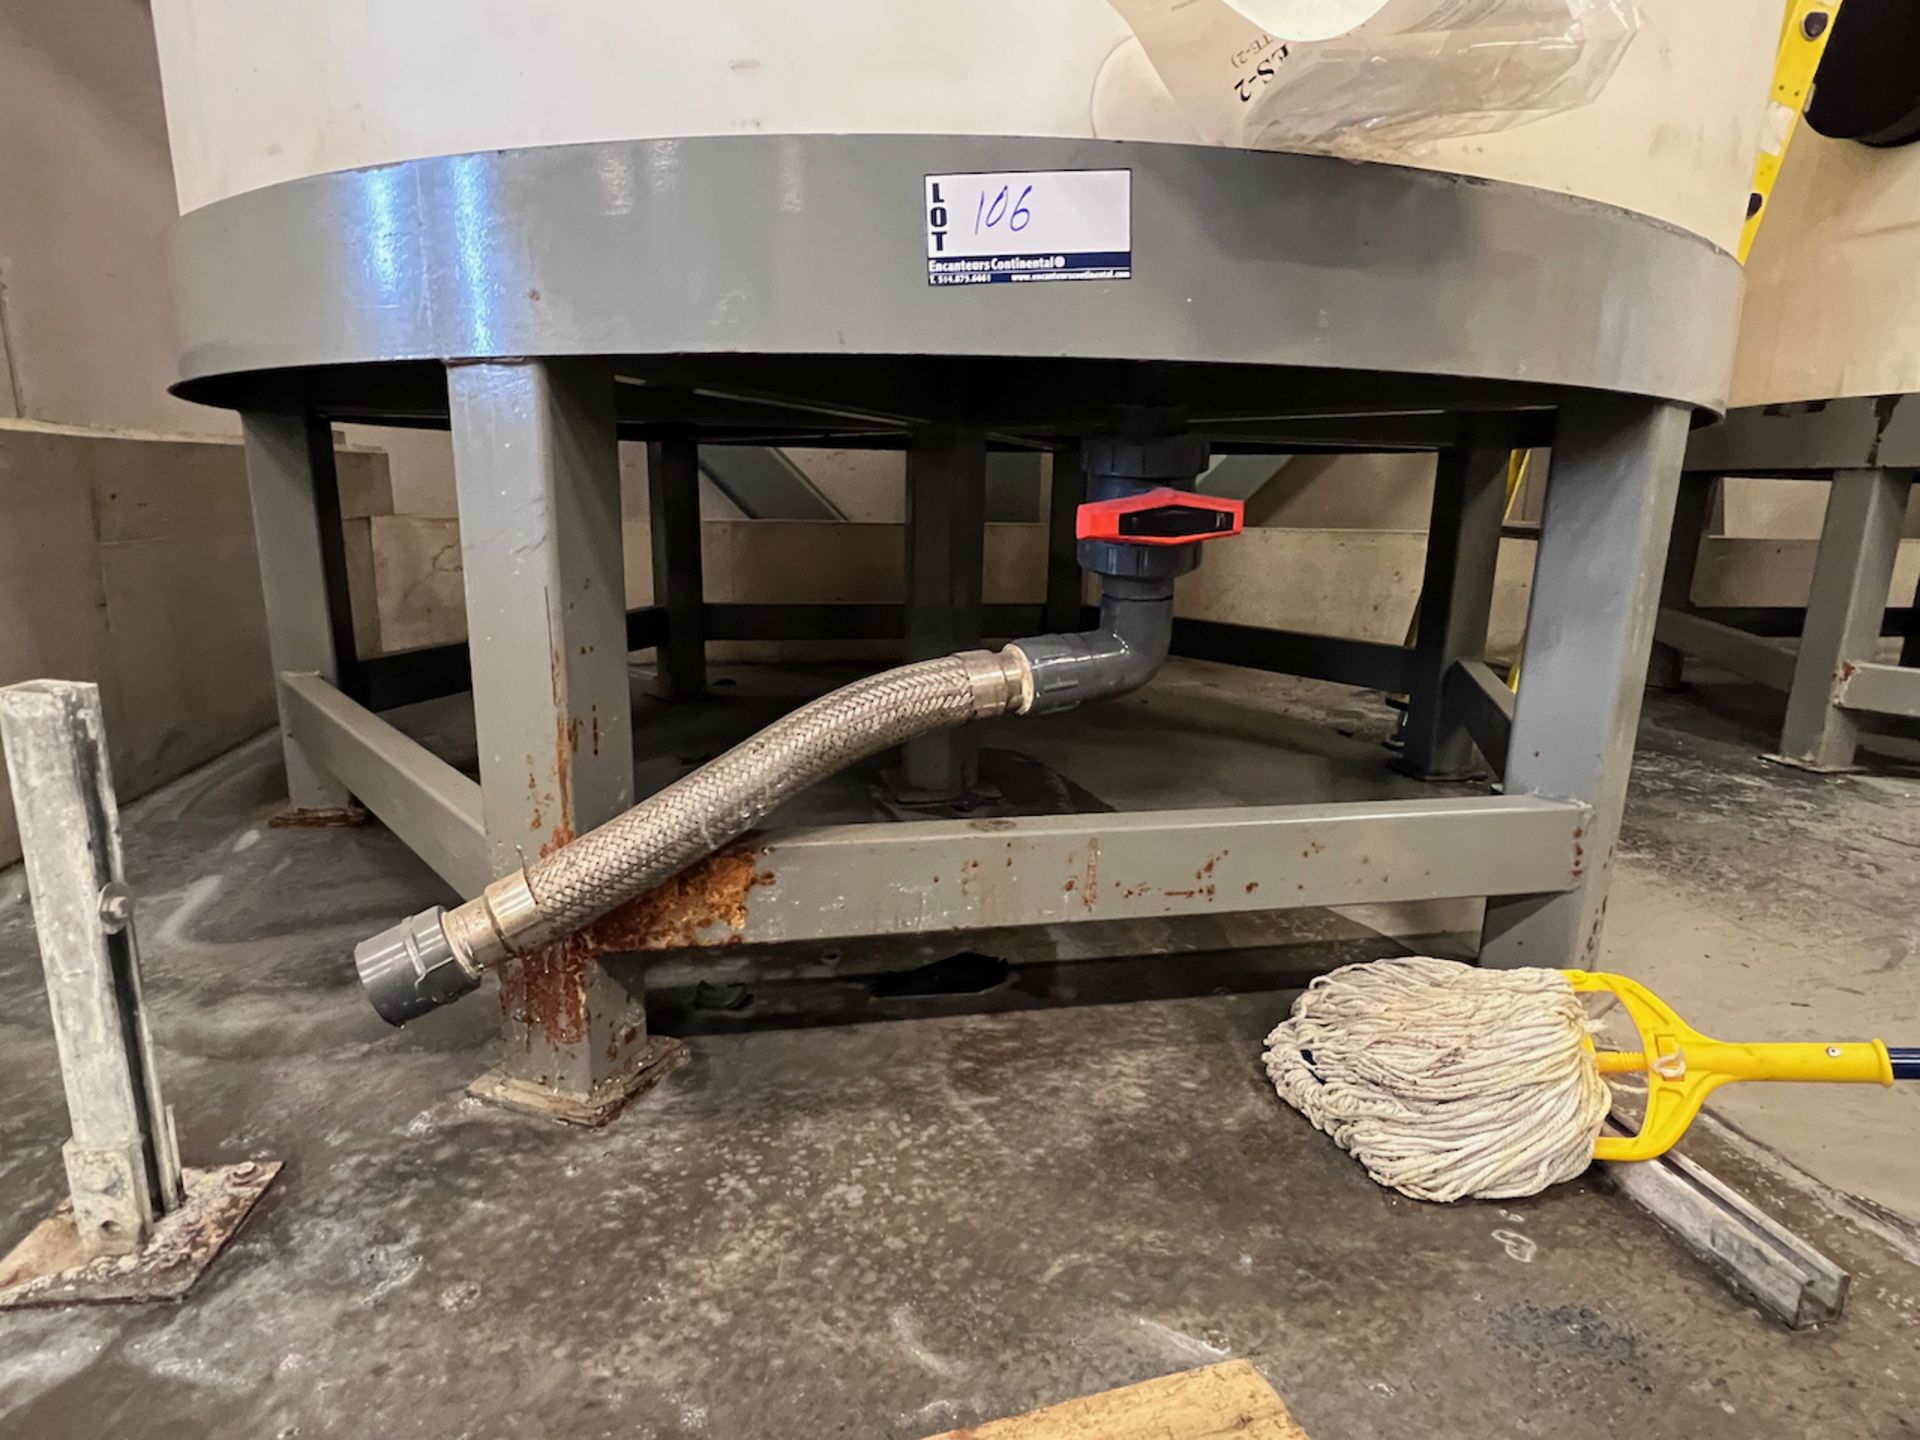 CY-BO 3000 US GAL STORAGE TANK WITH STAND - NEEDS REPAIR - Image 2 of 2